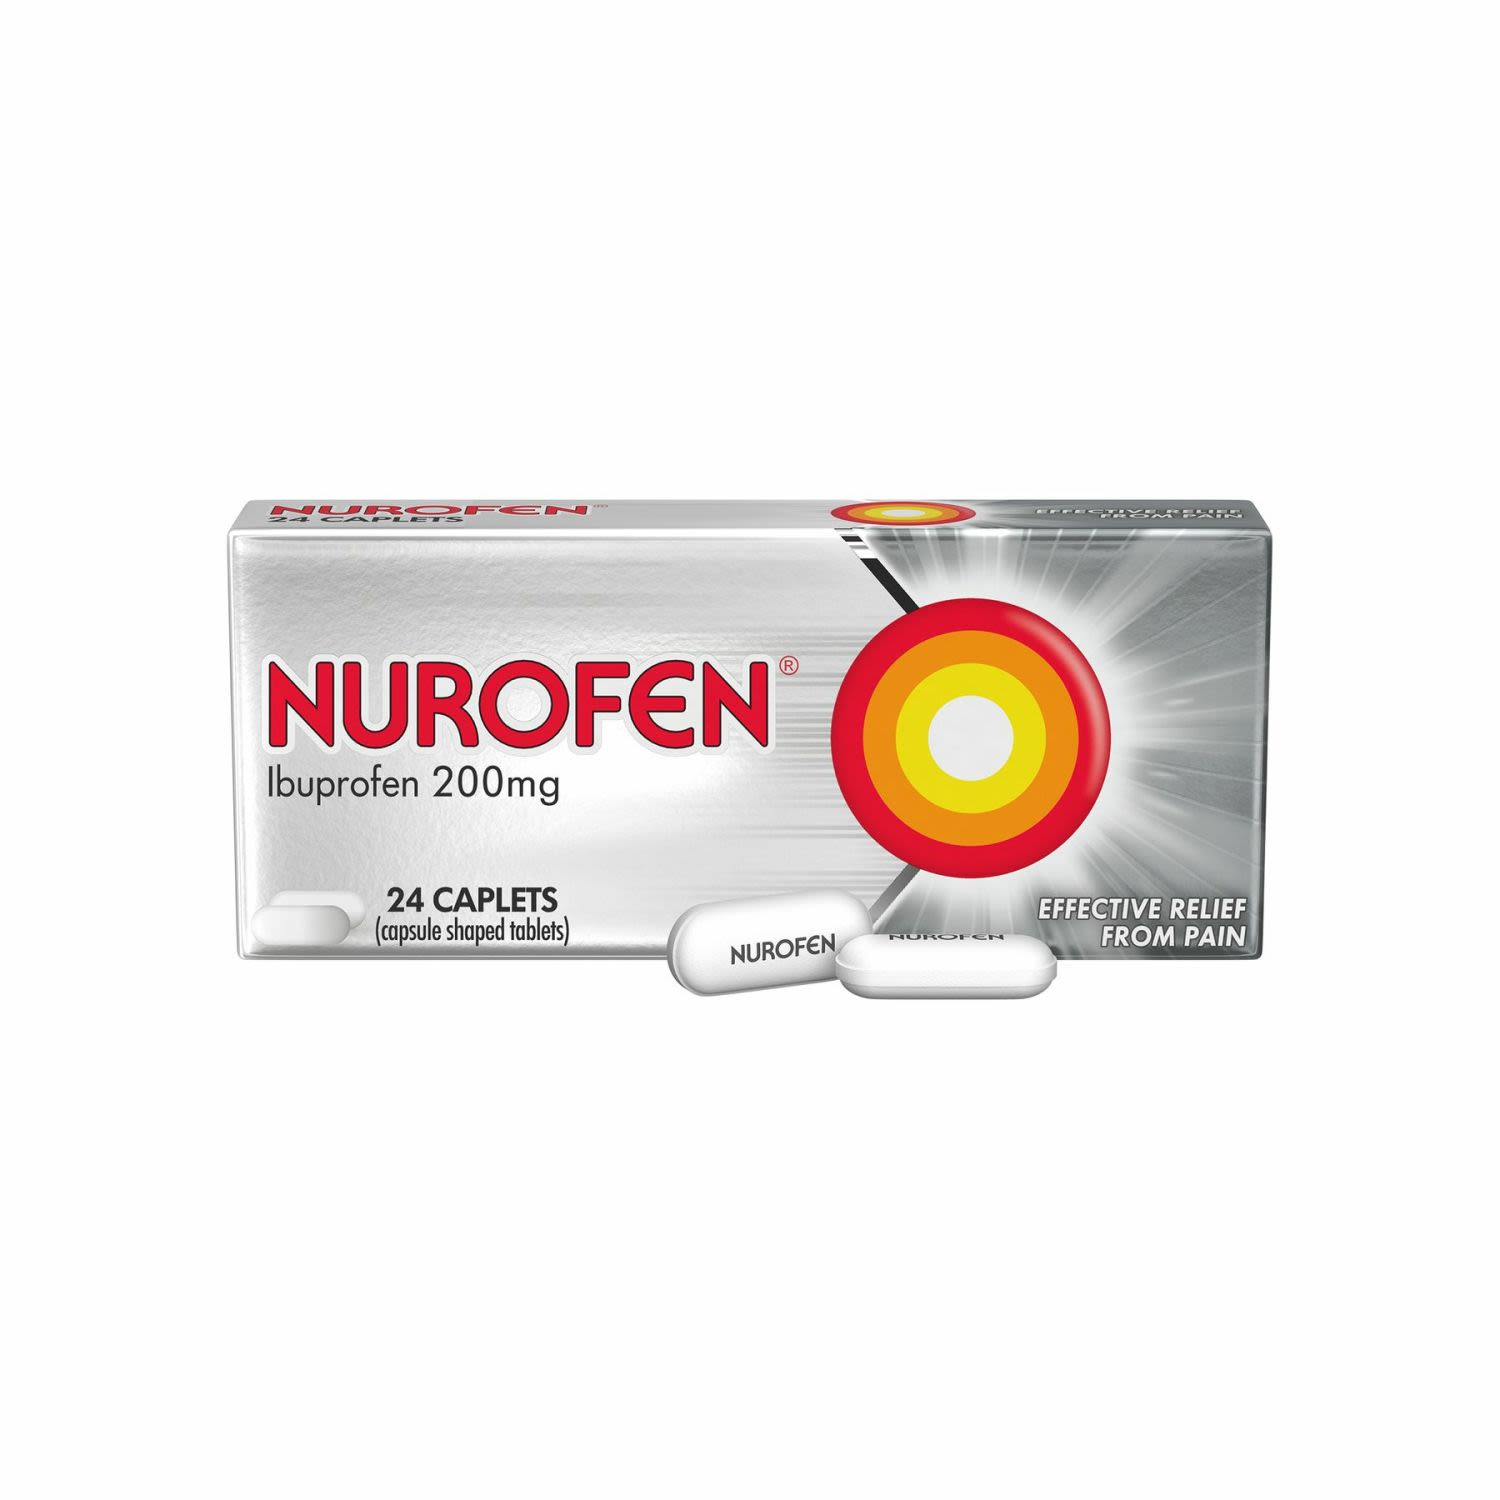 Nurofen Pain and Inflammation Relief Caplets 200mg Ibuprofen, 24 Each